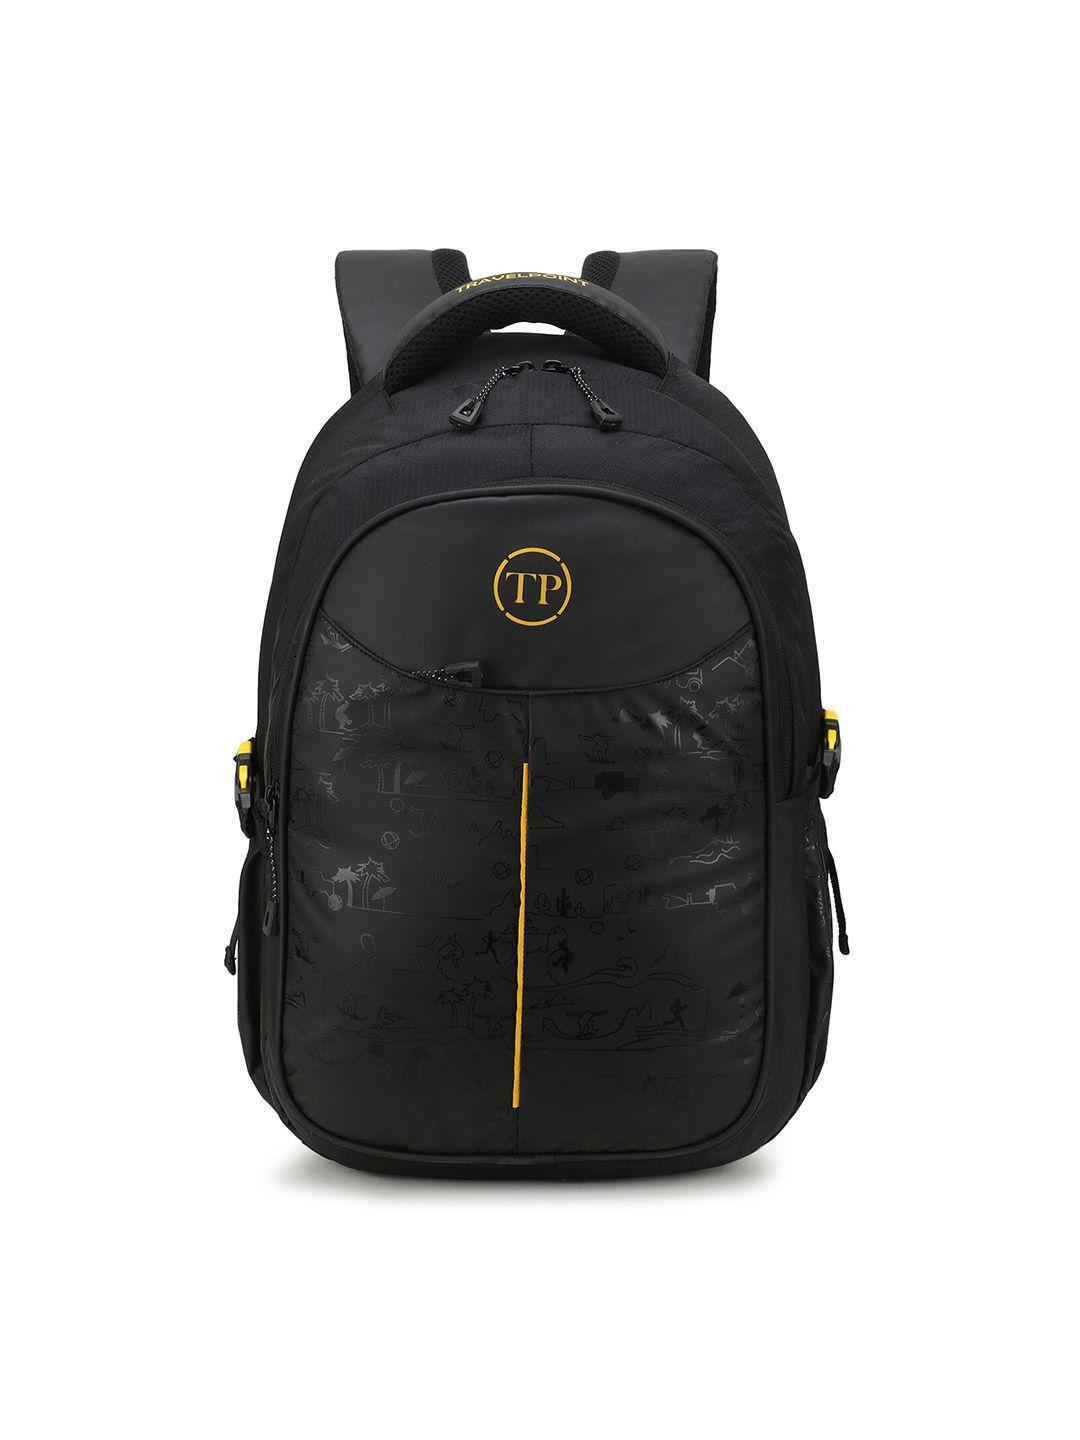 travel point black & yellow brand logo backpack with compression straps